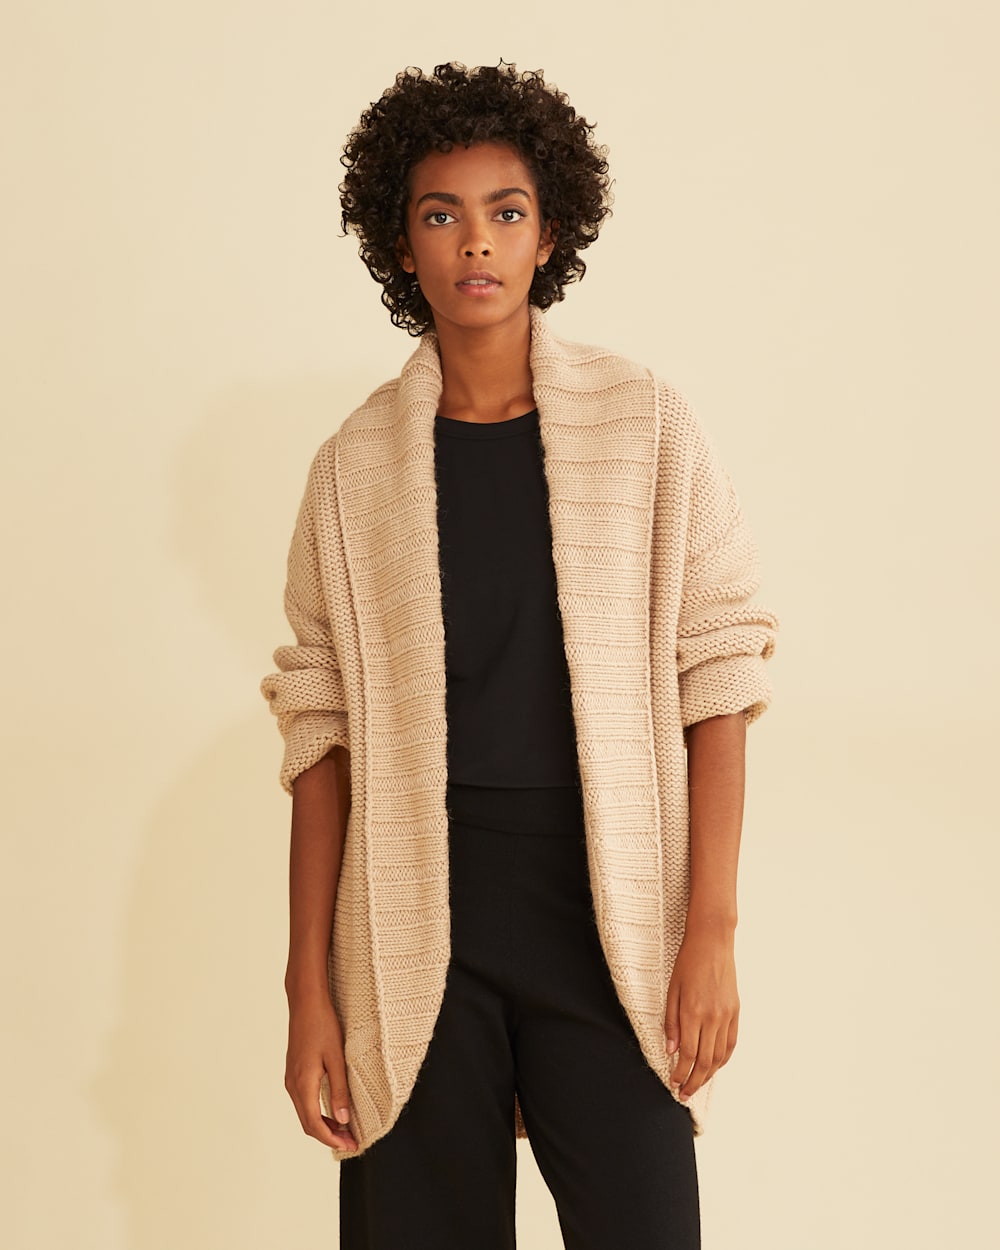 ALTERNATE VIEW OF WOMEN'S LUXE COCOON CARDIGAN IN FAWN image number 6